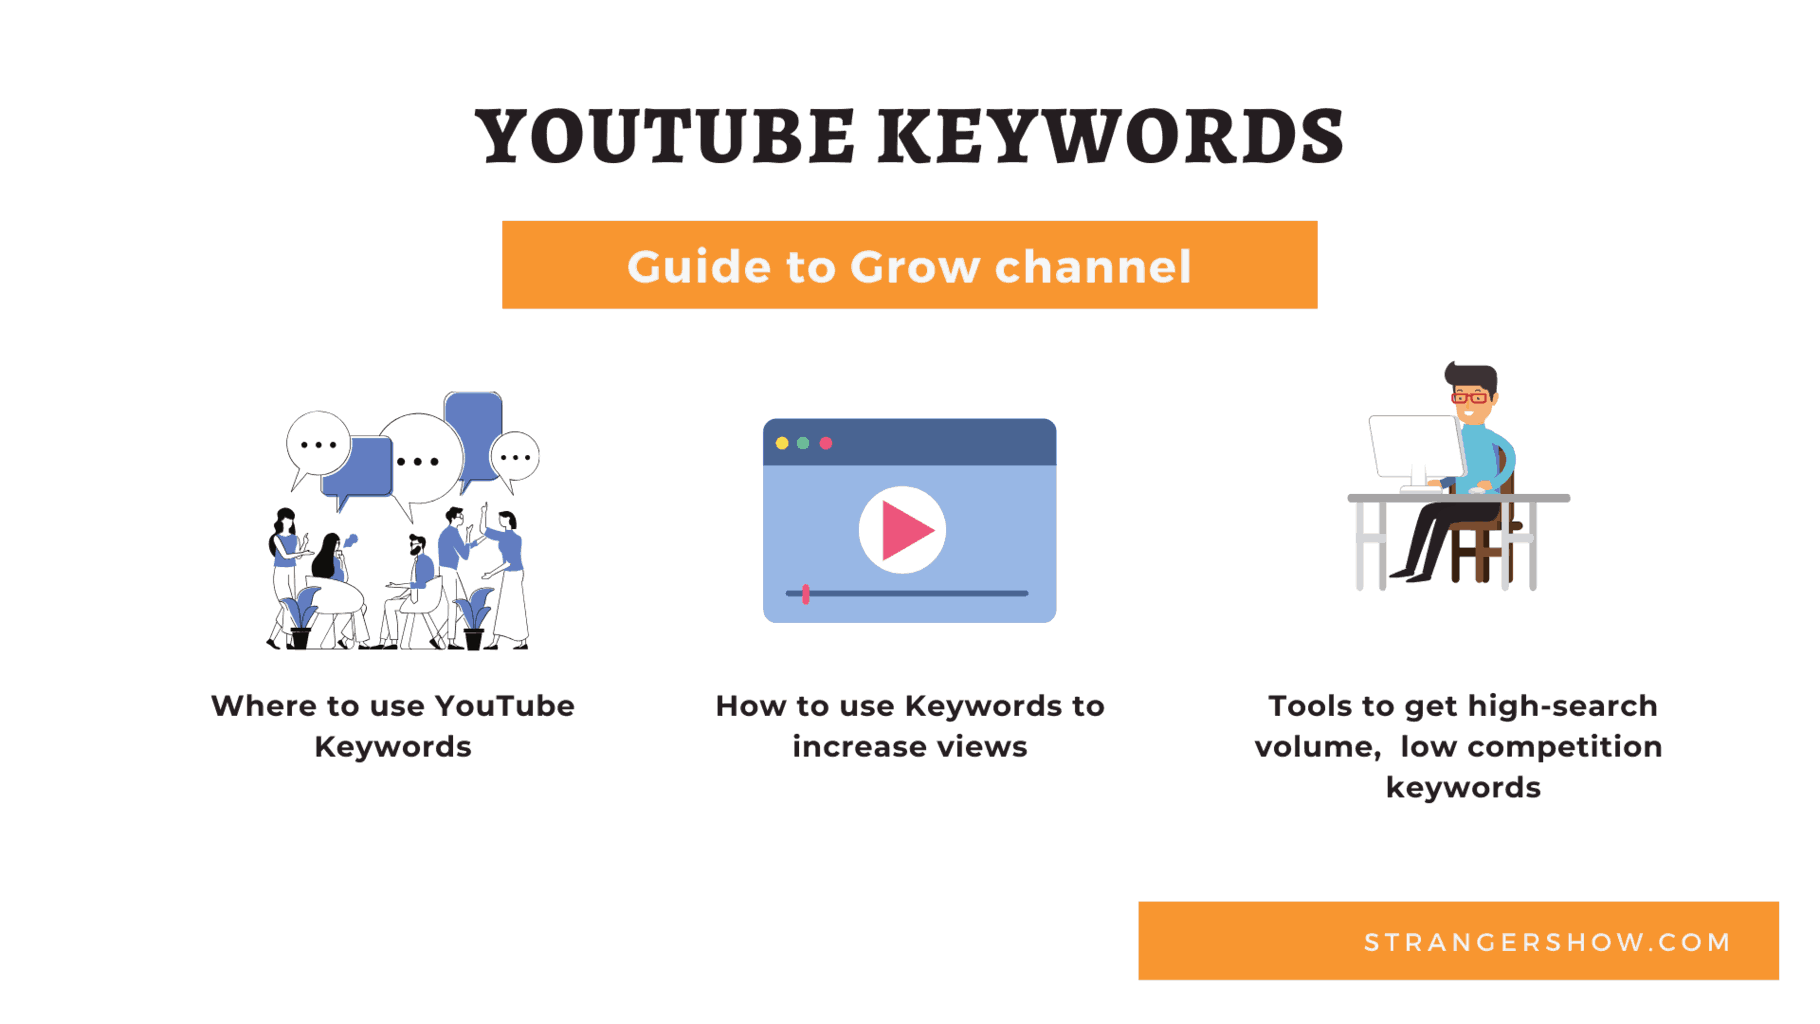 YouTube Keywords to Grow your channel